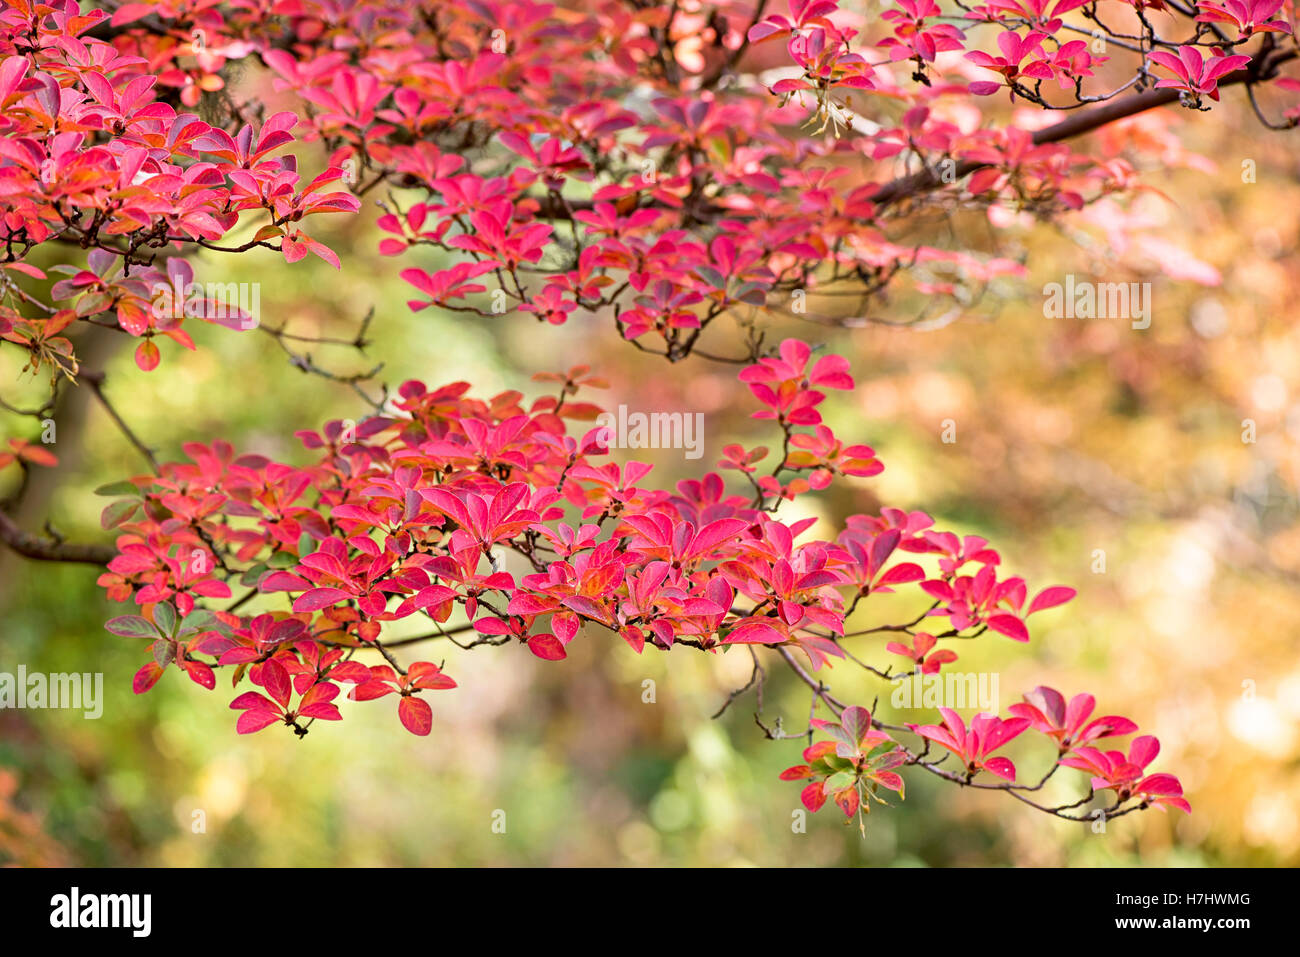 Autumn Colored Red Leaves Stock Photo